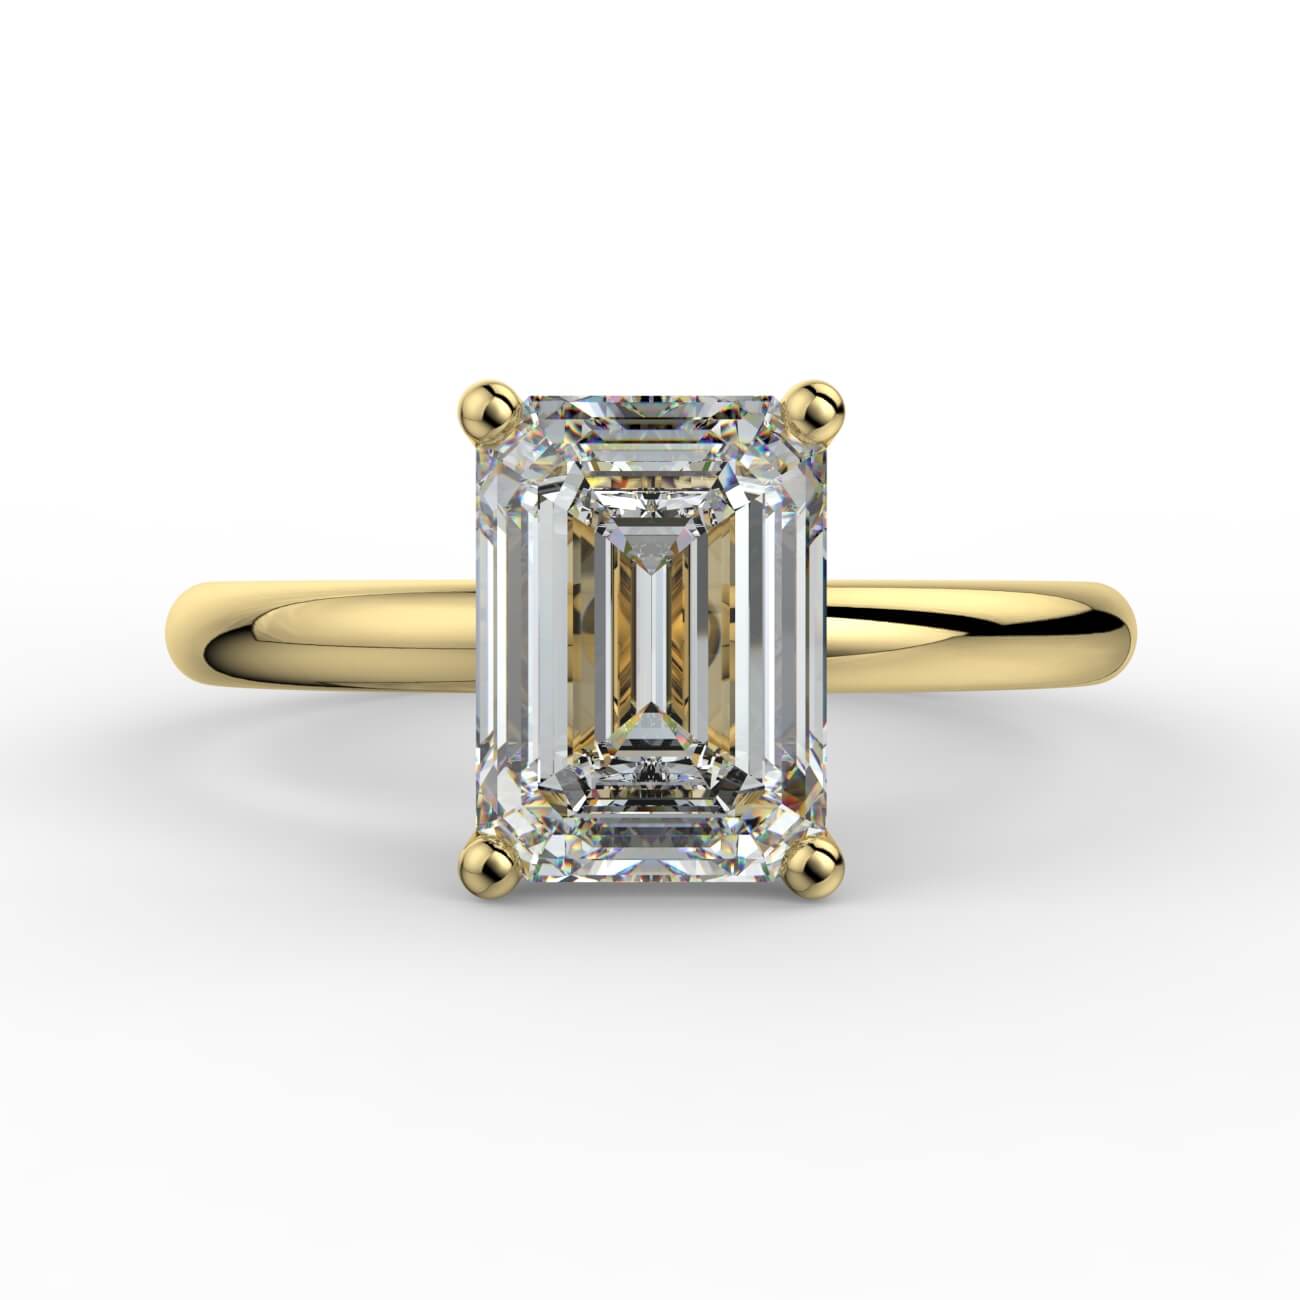 Comfort fit 4 claw emerald cut solitaire diamond ring in yellow gold – Australian Diamond Network